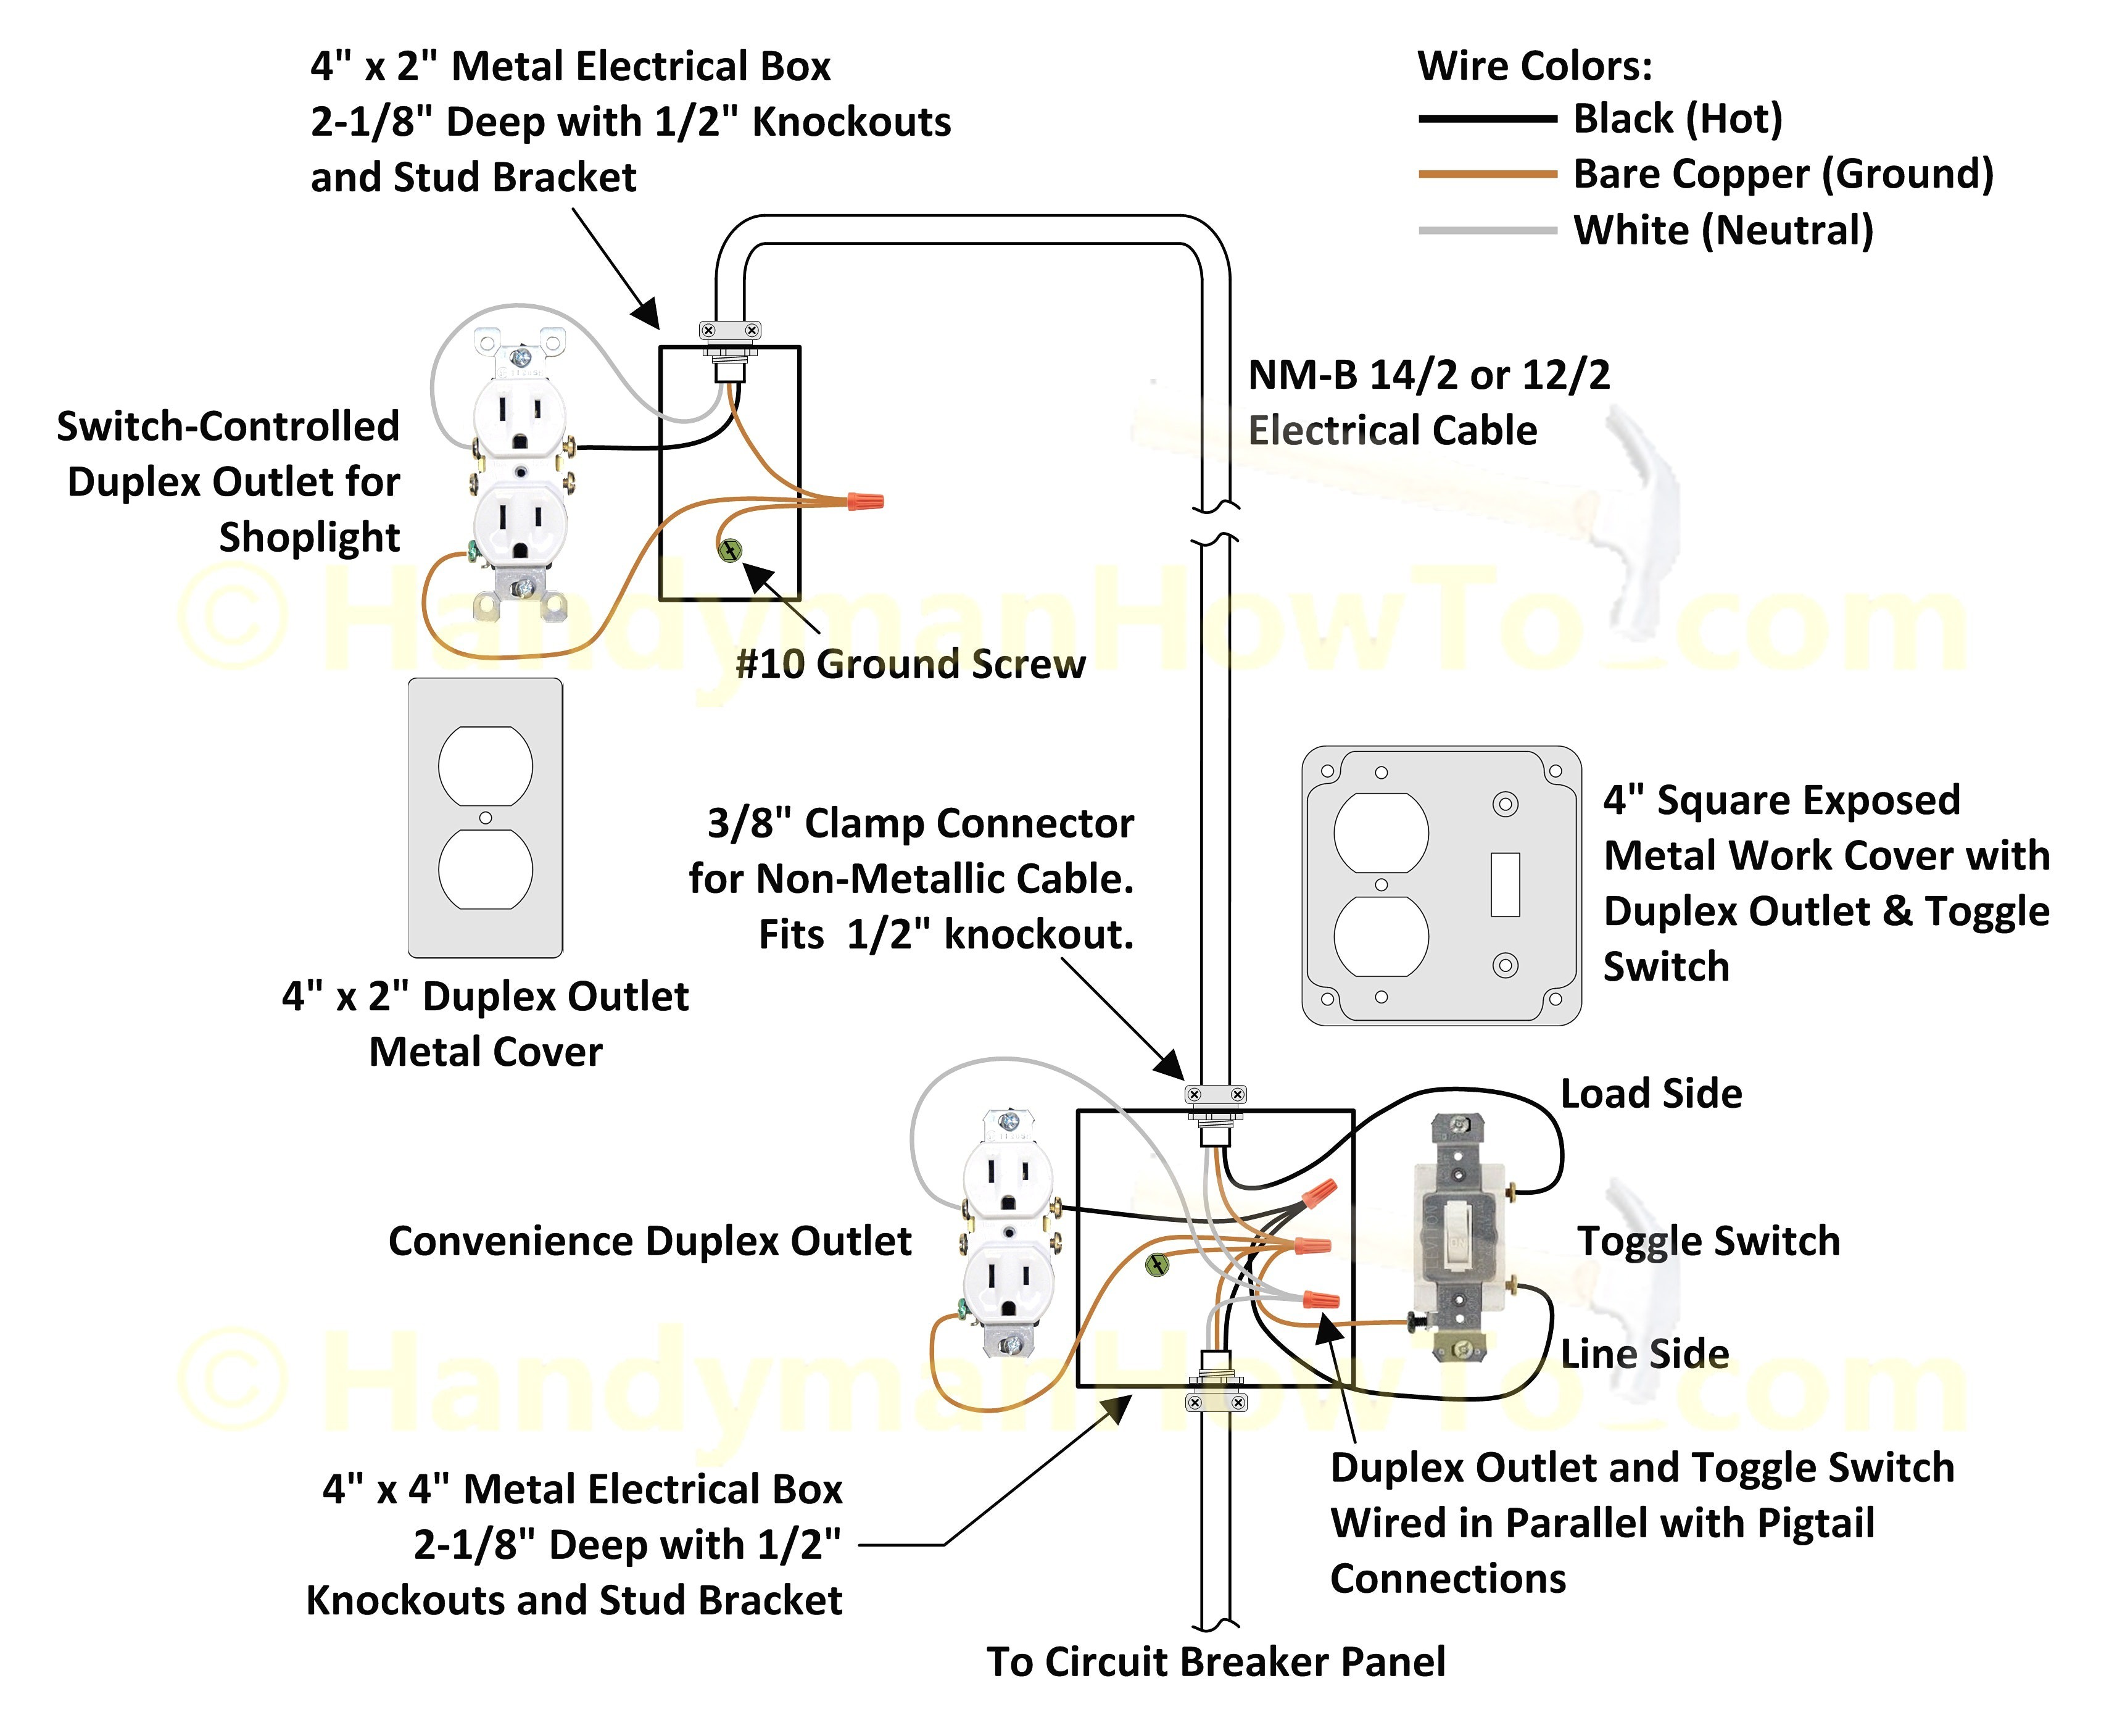 Carling Switches Wiring Diagram Fantastic carling toggle switch wiring diagram illustration beautiful carling switch wiring diagram